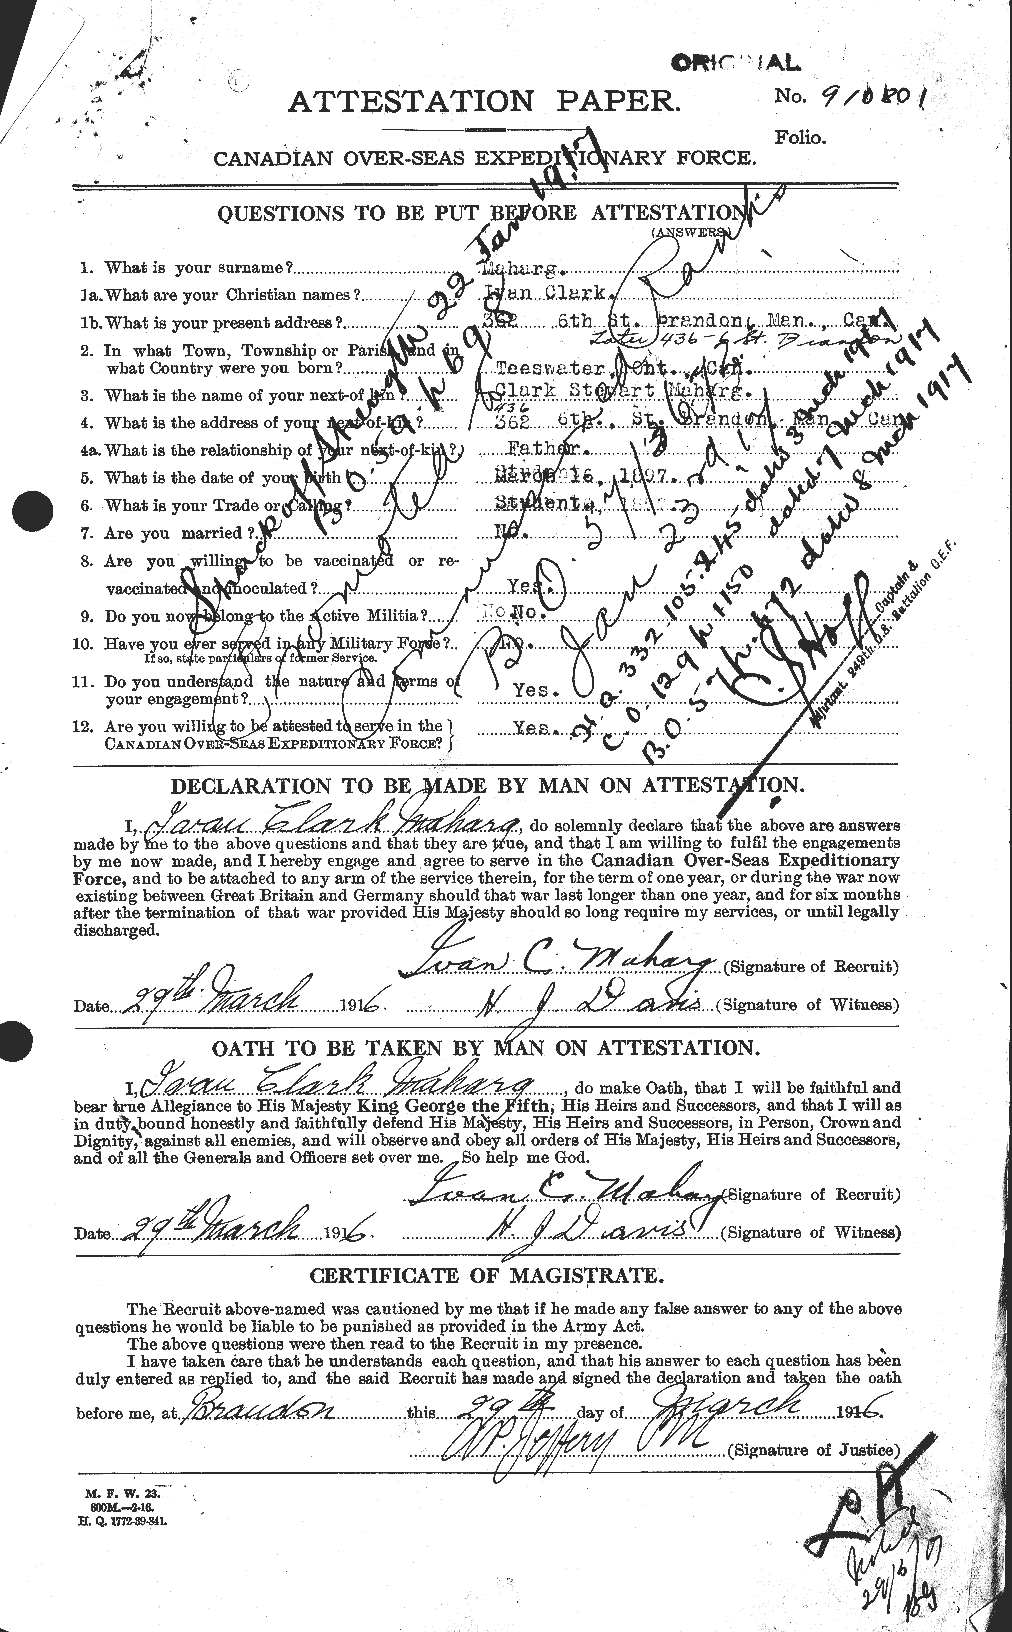 Personnel Records of the First World War - CEF 481957a